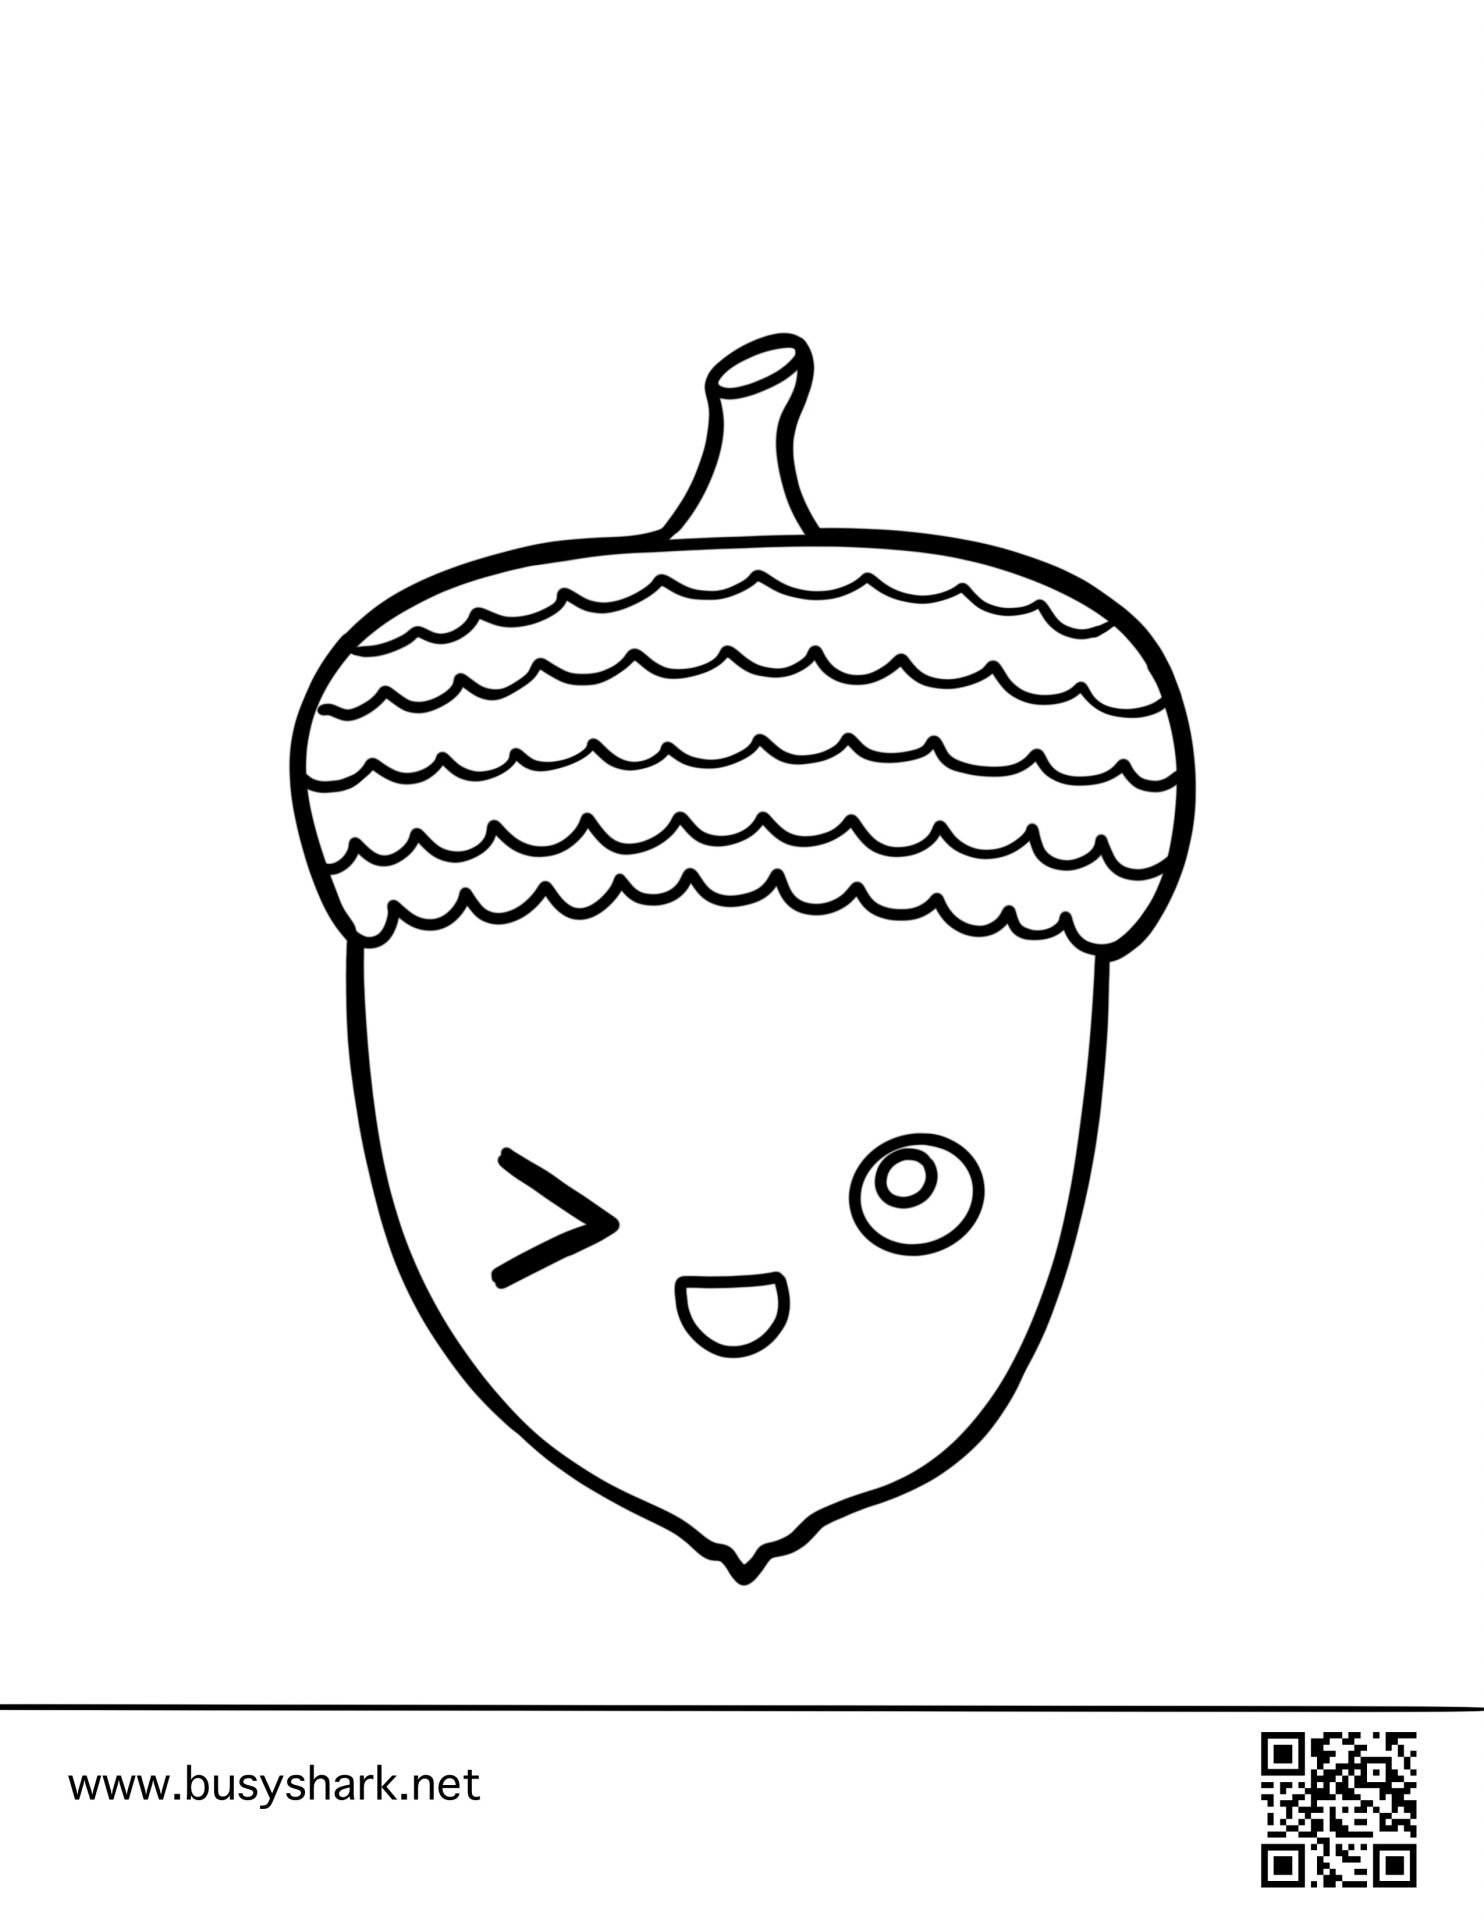 Cute acorn coloring page